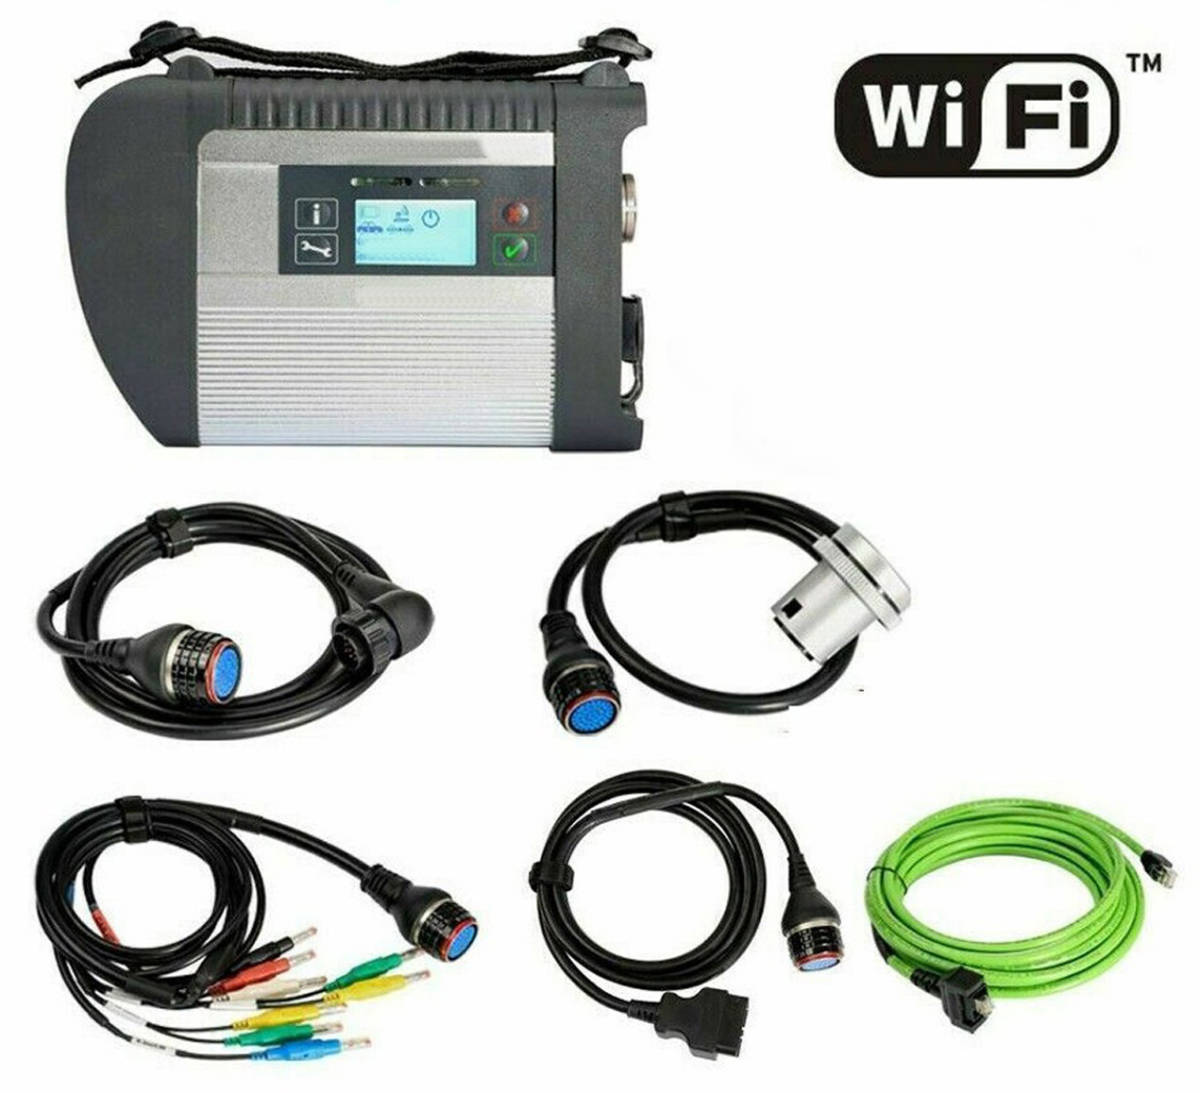  newest 2022 year 12 month version Benz Japanese complete version XENTRY DAS HHTWIN Vediamo DTS MONACO C4 WIFI DOIP dealer diagnosis machine tester coding WIS